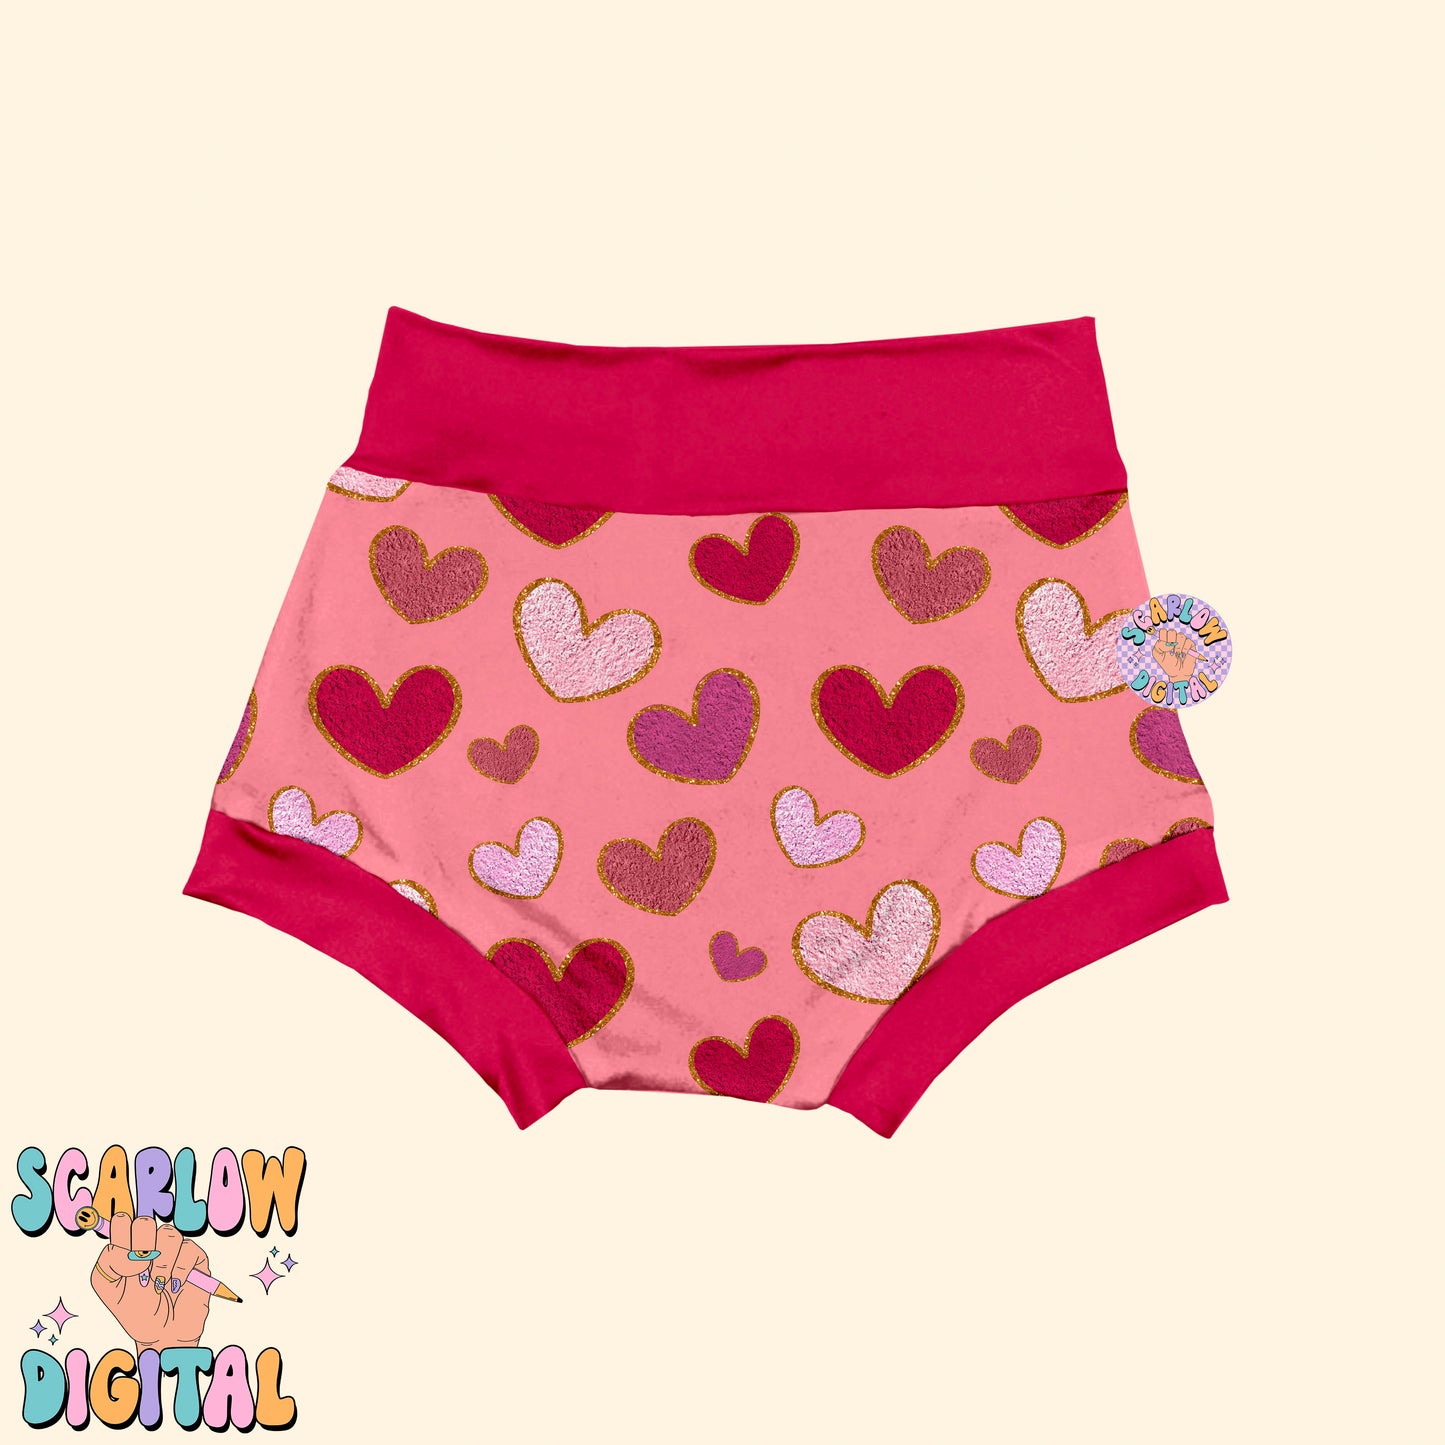 Faux Chenille Hearts Seamless Pattern-Valentine's Day Sublimation Digital Design Download-hearts seamless pattern, girly valentines seamless